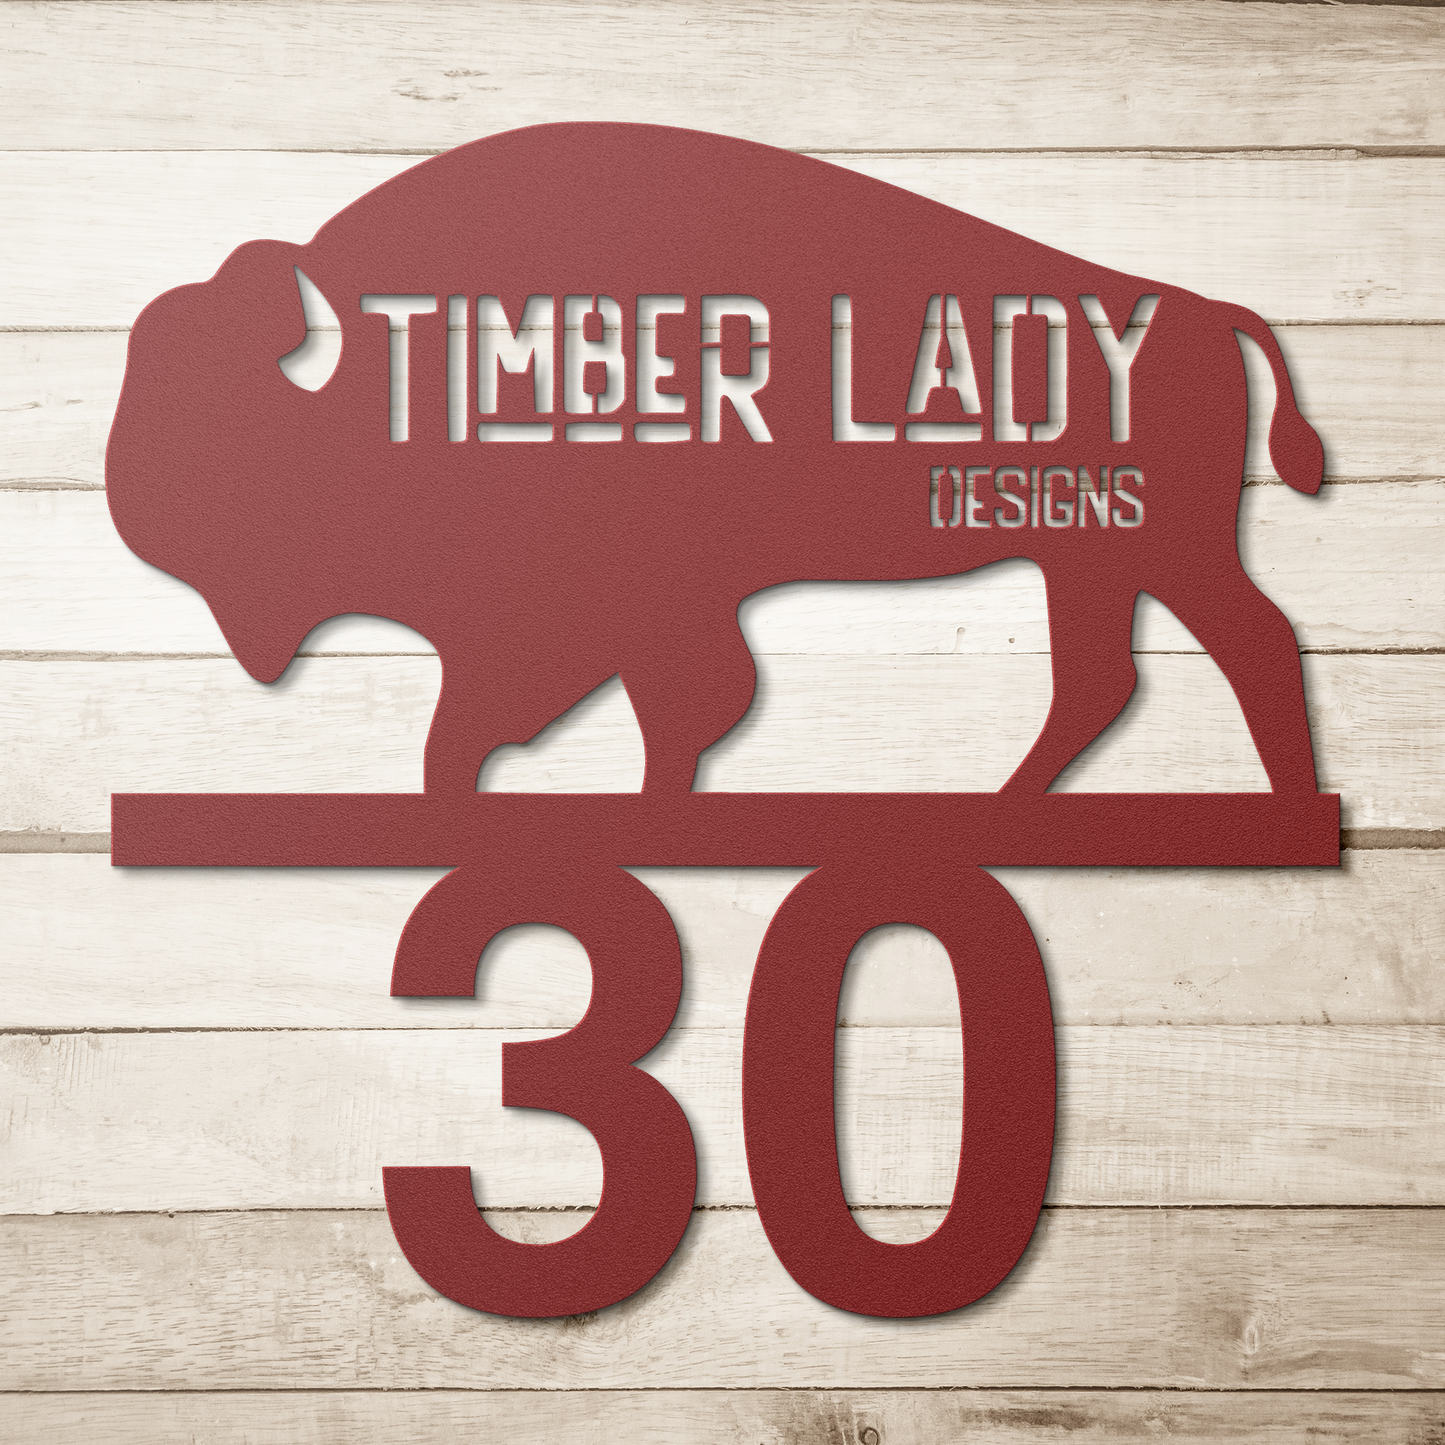 Buffalo steel address sign personalized with name and address number